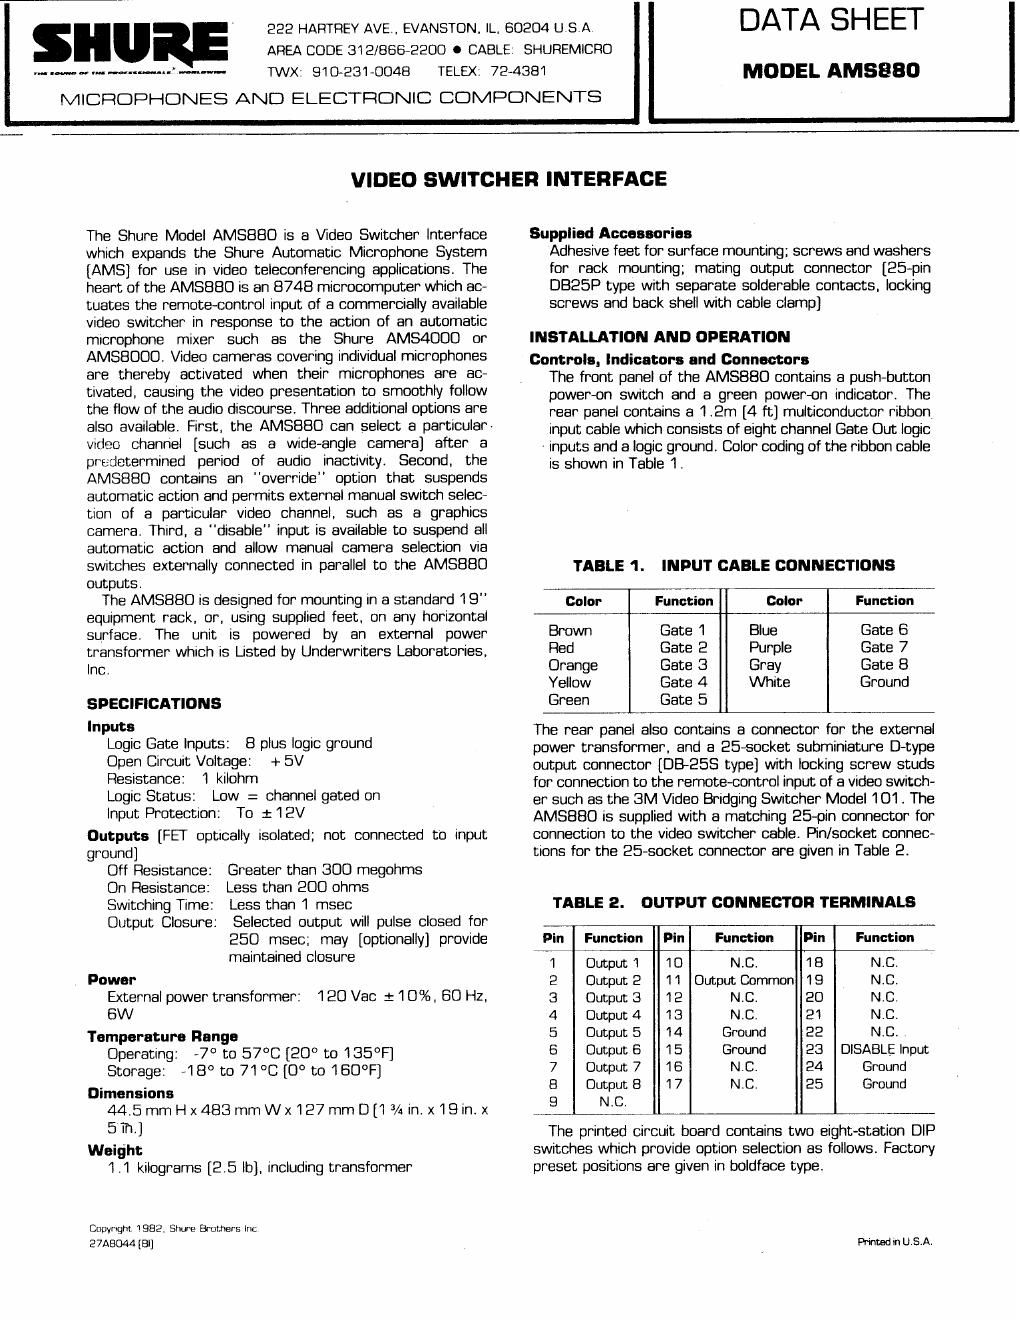 shure ams880 owners manual